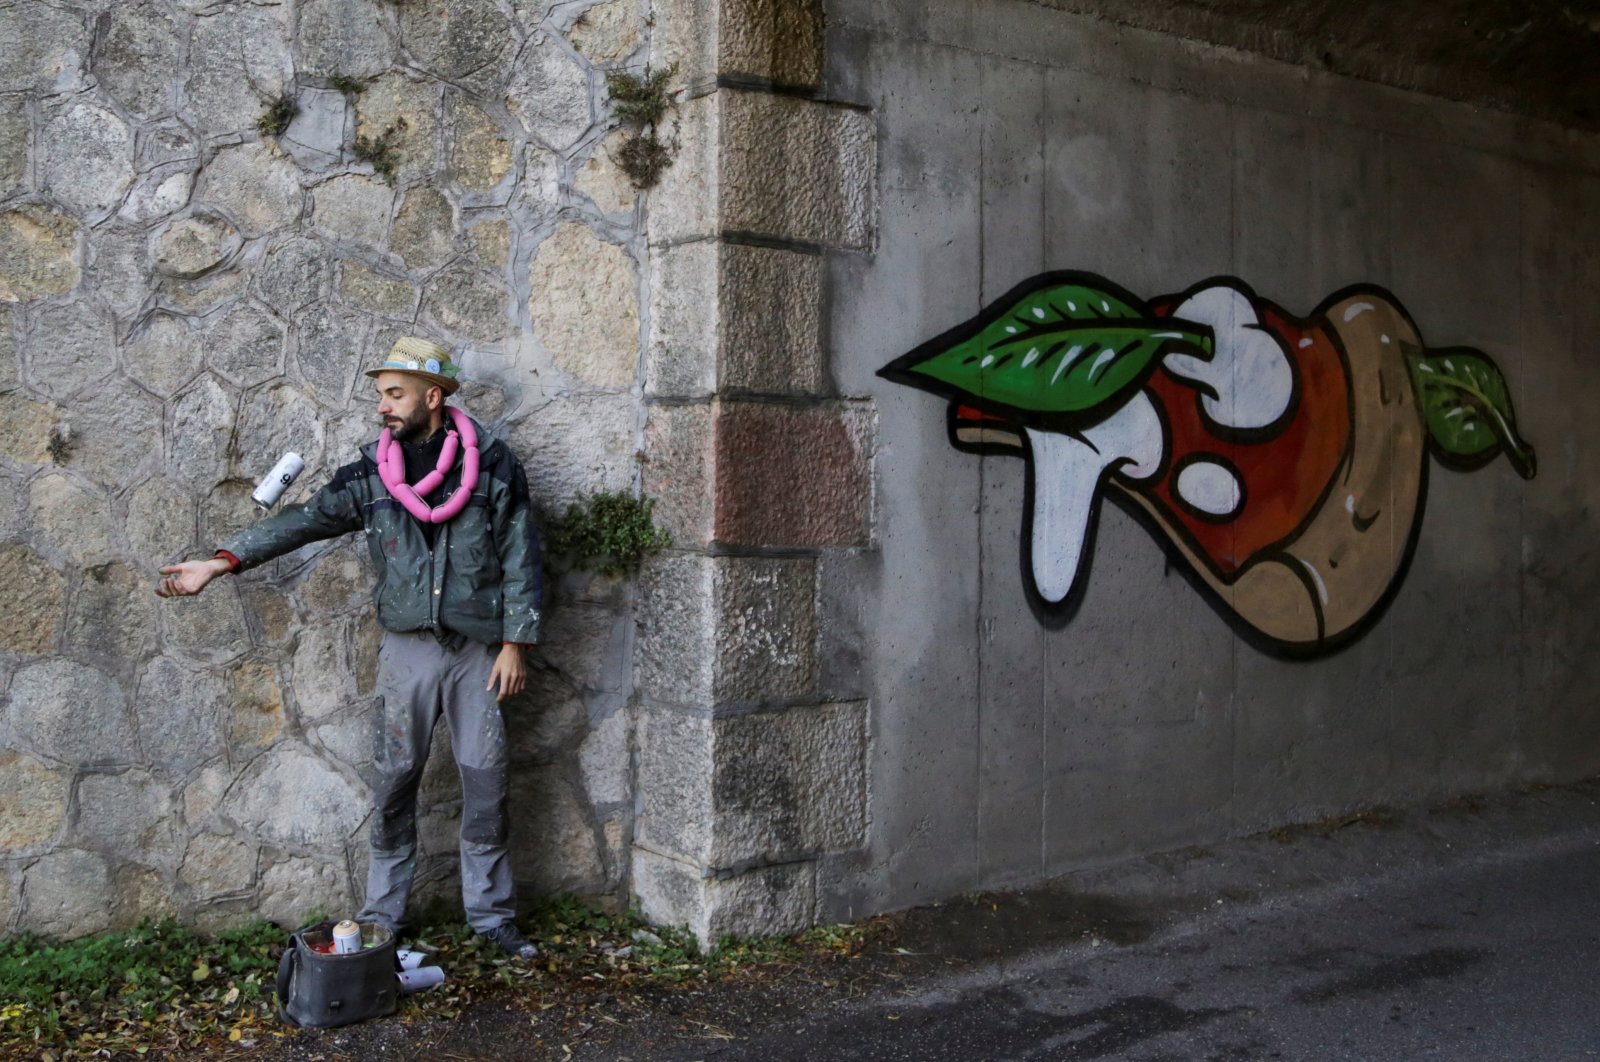 Italian street artist Pier Paolo Spinazze, 39, known as &quot;Cibo&quot; (Italian for food), uses spray paint to cover racist graffiti with a mural of pizza, near Verona, Italy, Nov. 18, 2021. (Reuters Photo)